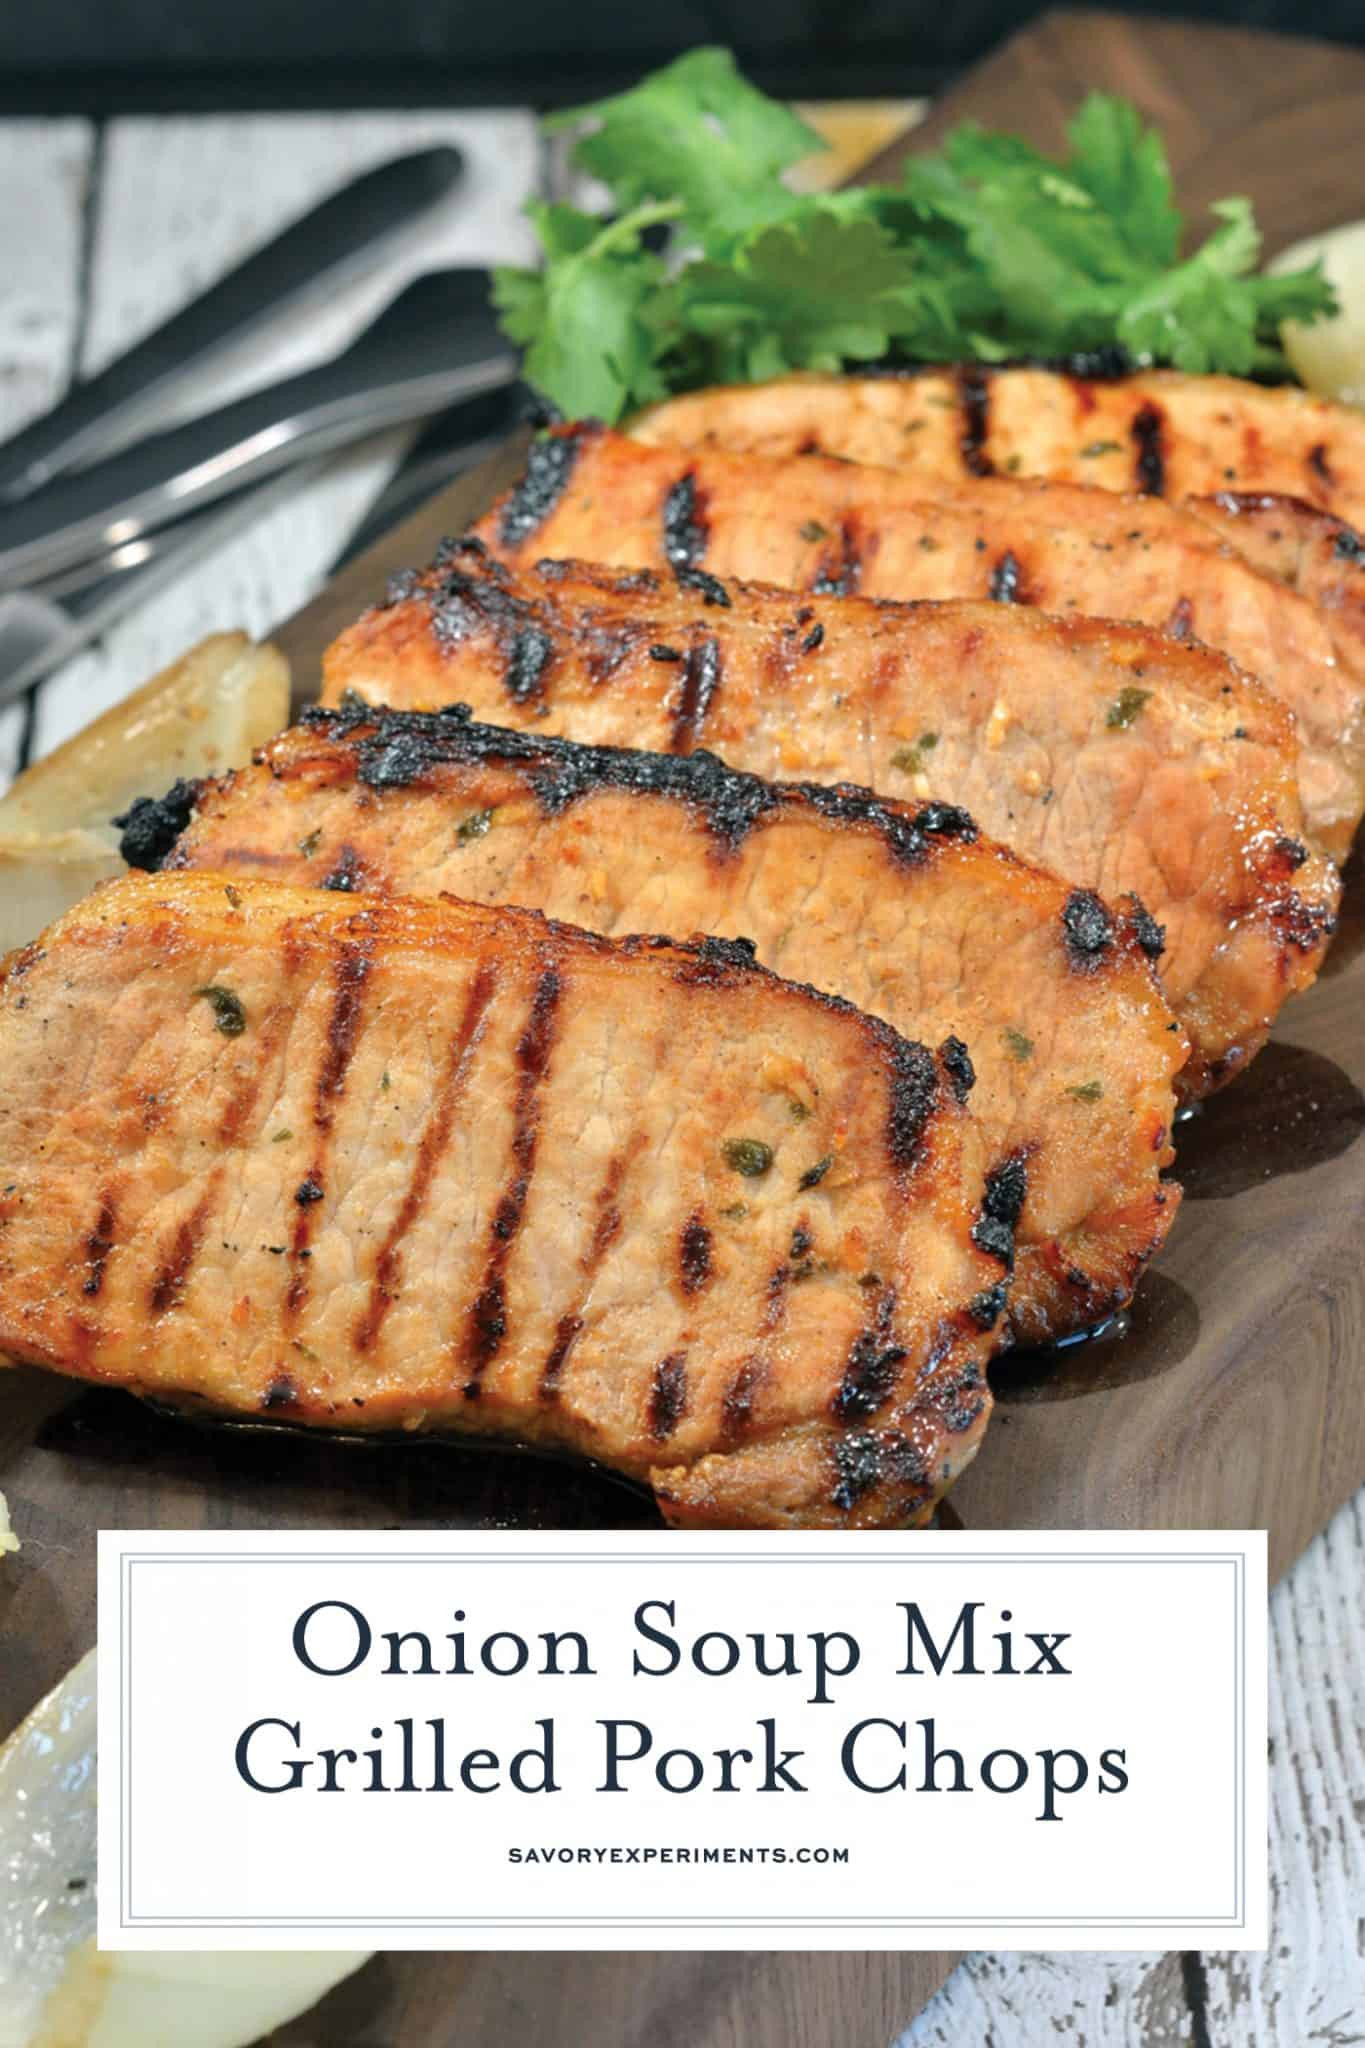 Pork Chops And Rice Recipe With Onion Soup Mix
 ion Soup Mix Grilled Pork Chops An Easy Pork Chop Recipe